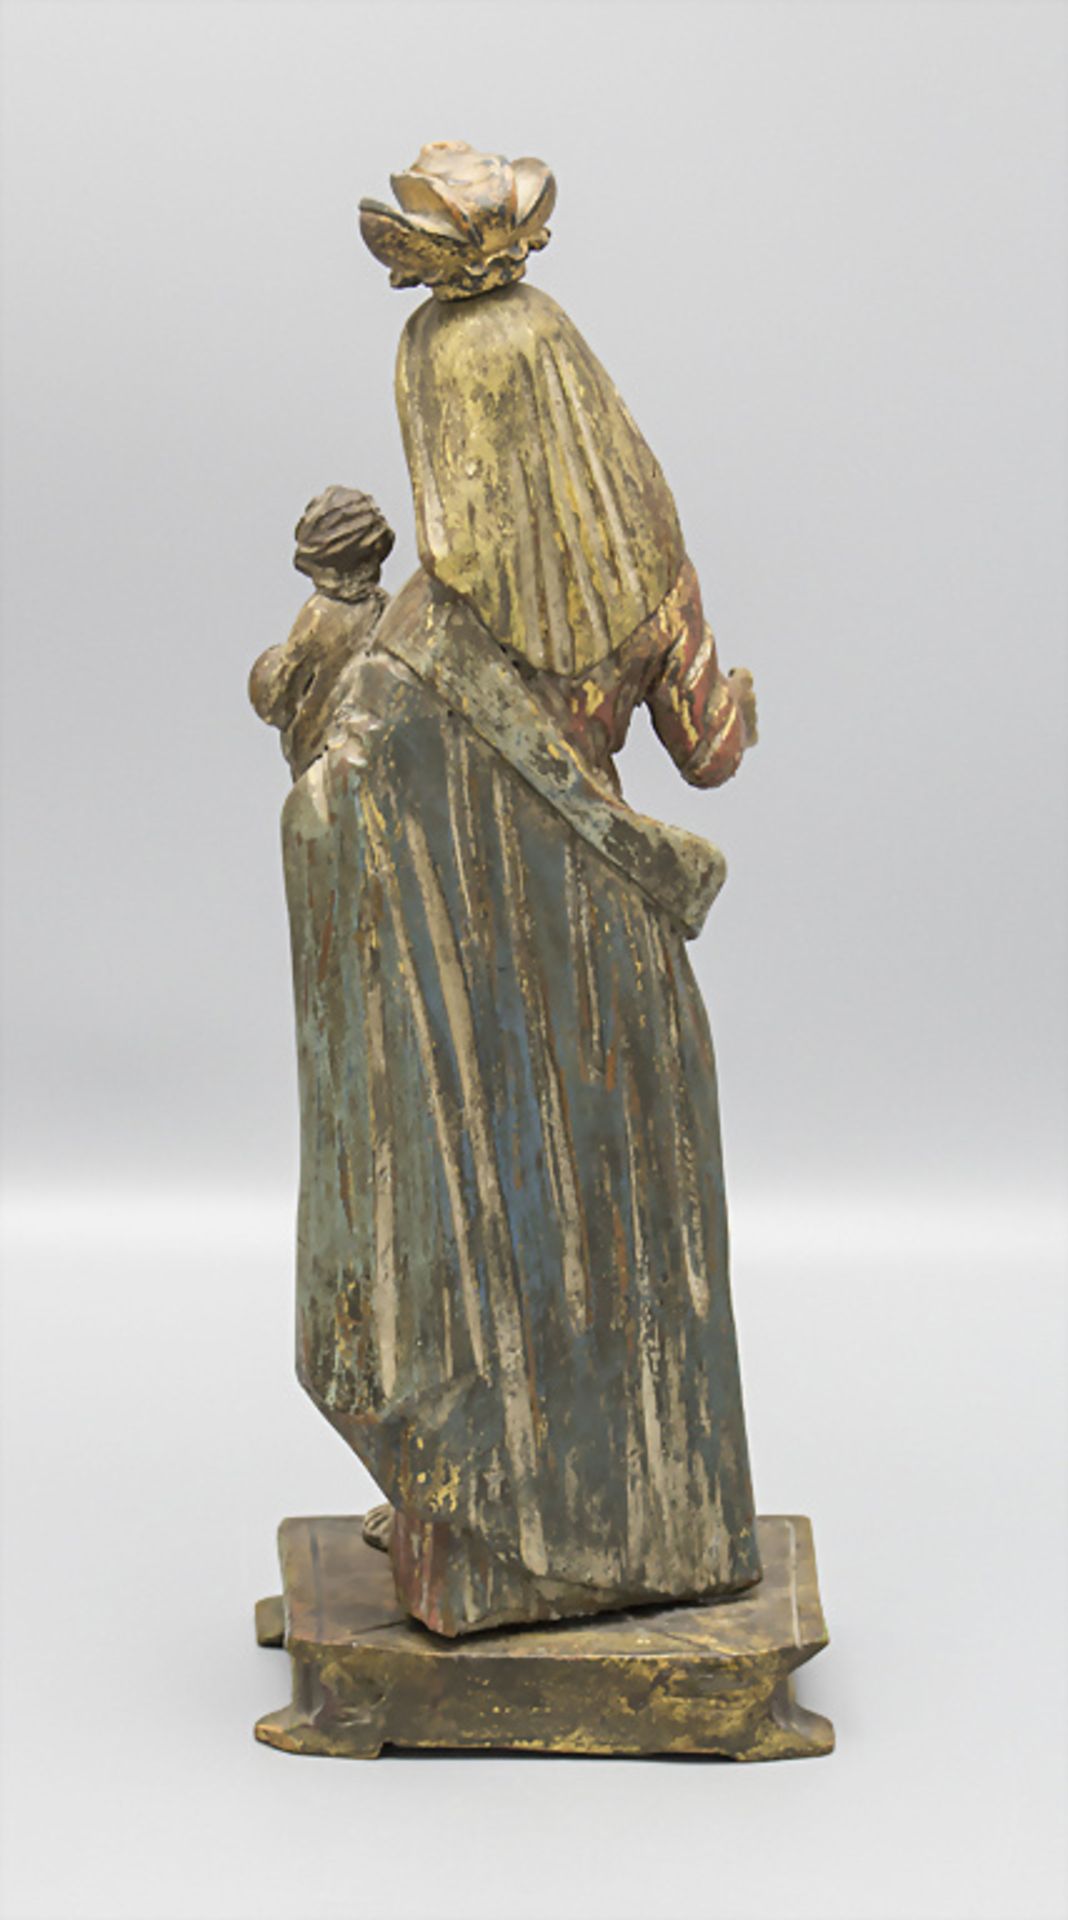 Holzskulptur einer Madonna mit Kind / A wooden sculpture of mother Mary with child, 18. Jh. - Image 4 of 6